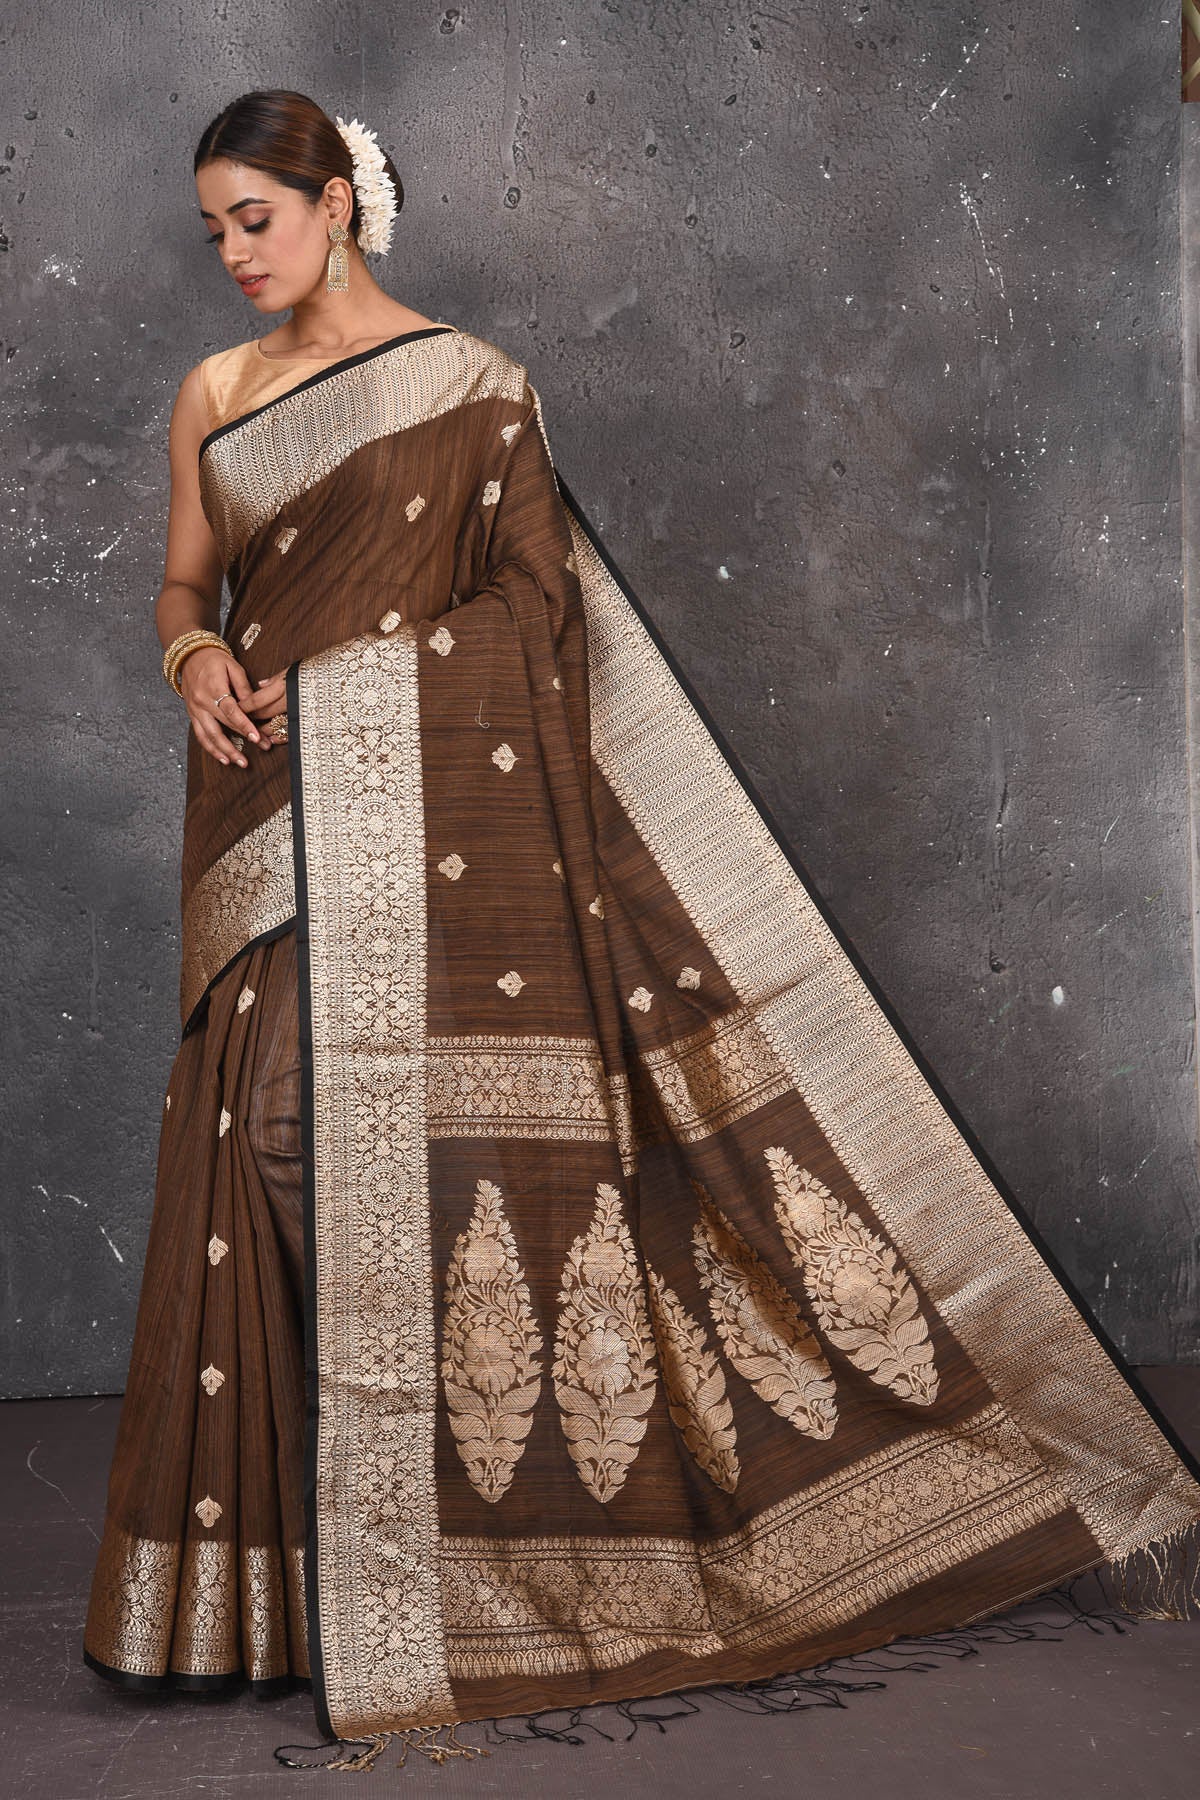 Buy elegant brown zari woven matka Silk Banarasi saree with zari broad border online in USA which has crafted by skilled weaver of Banaras with elegance and grace, this saree is definitely the epitome of beauty and a must have in your collection. Buy designer handwoven banarasi brocade sari with any blouse from Pure Elegance Indian saree store in USA. -Full view.